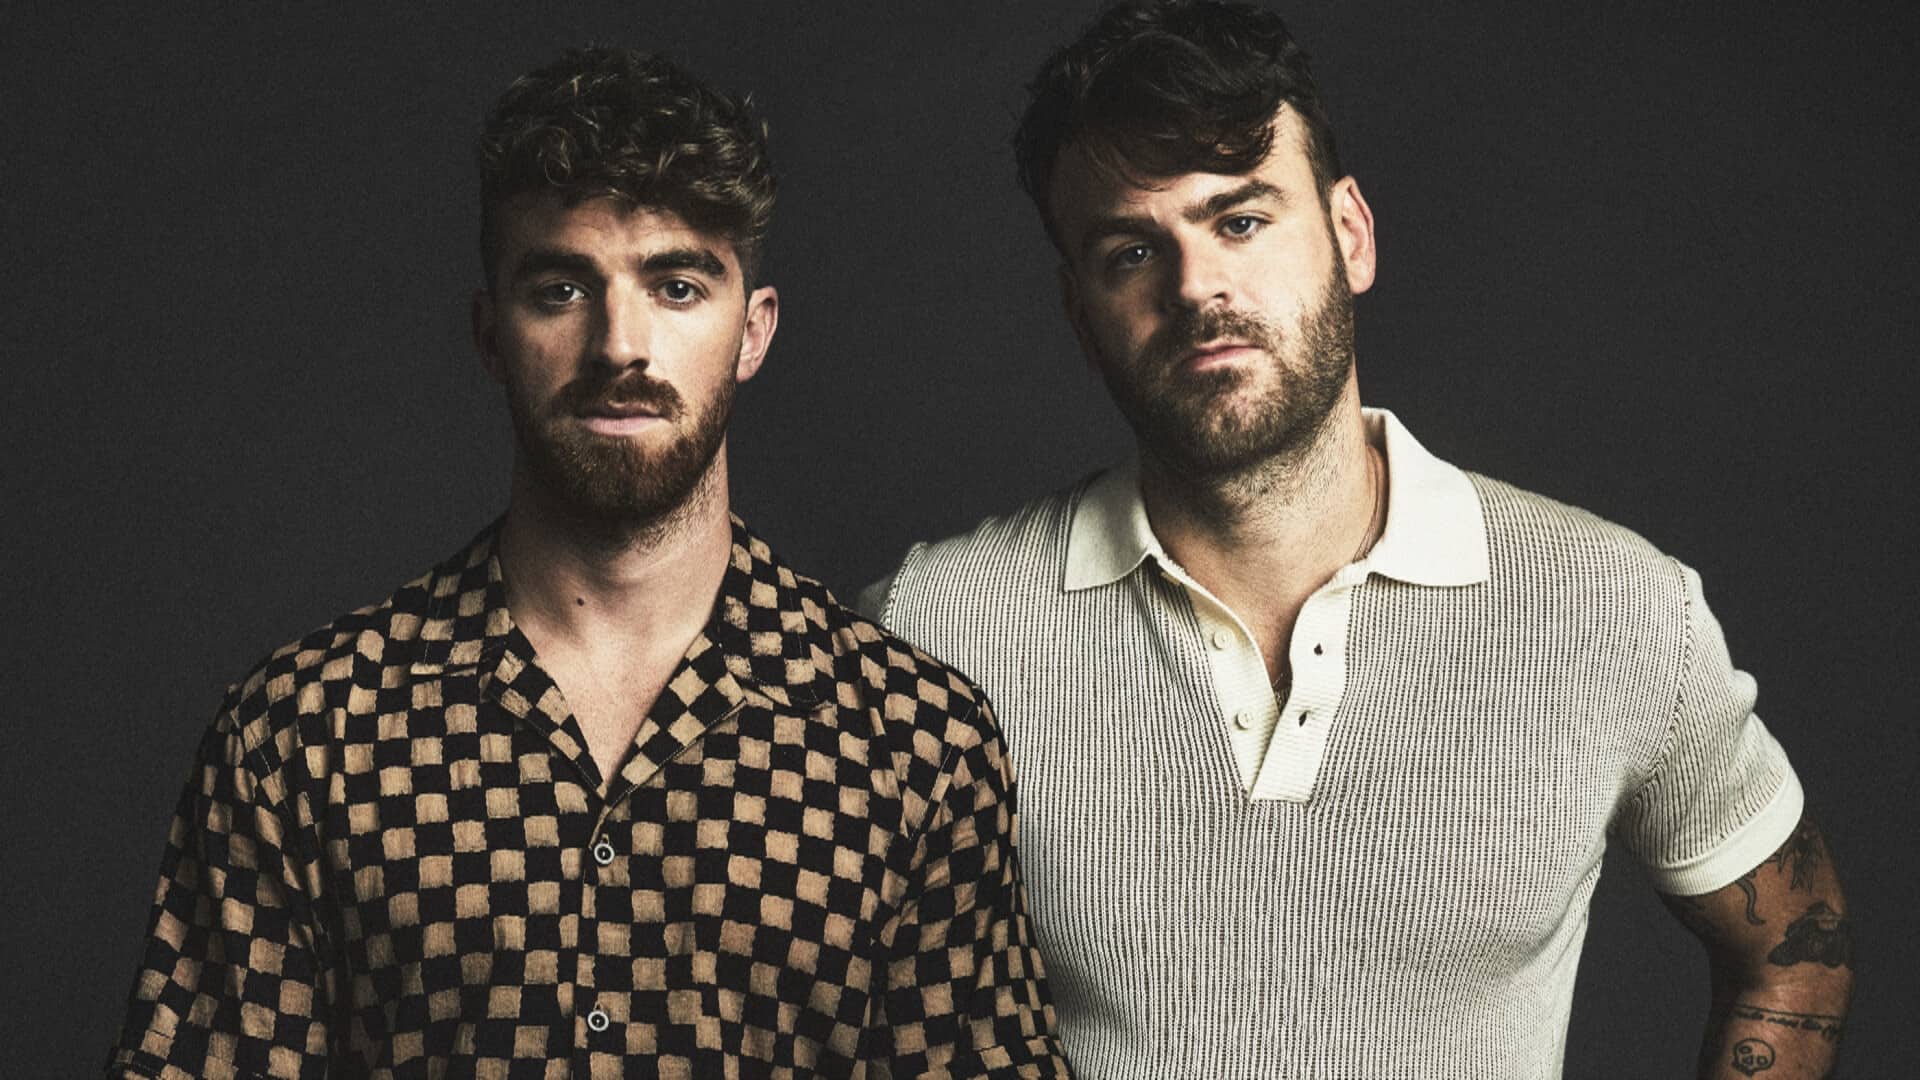 The Chainsmokers host sober-supportive concert, David Guetta & MORTEN Future Rave ‘Episode 2’ EP, Dance music is now the second most popular genre in the UK - WTEMN [2022-11 (Week #44)]